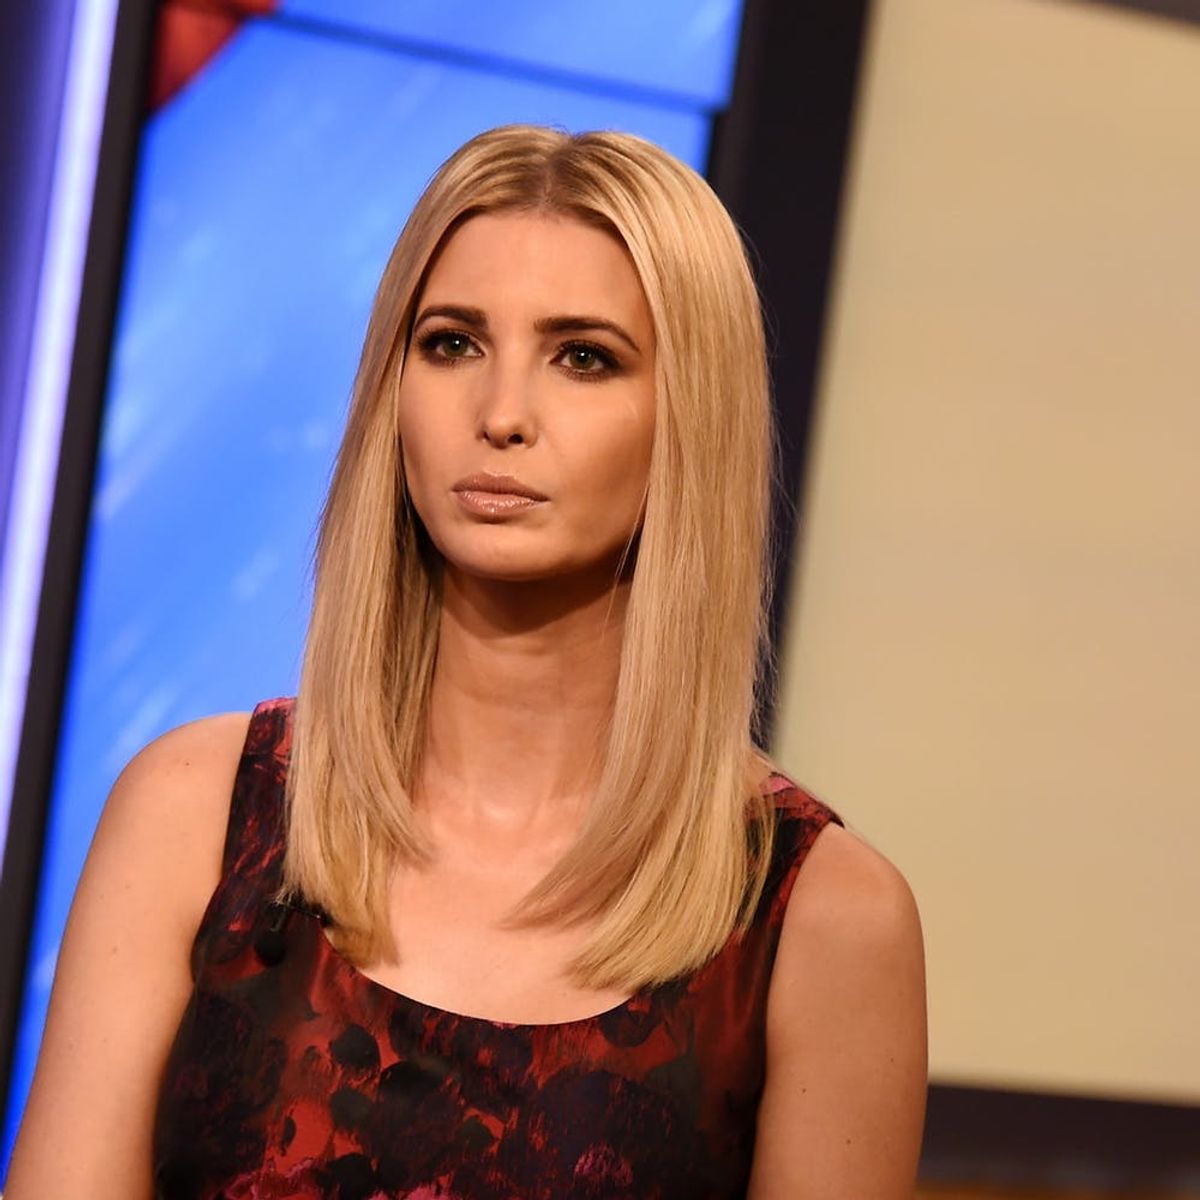 Two Major Department Stores Have Dropped Ivanka Trump Brand